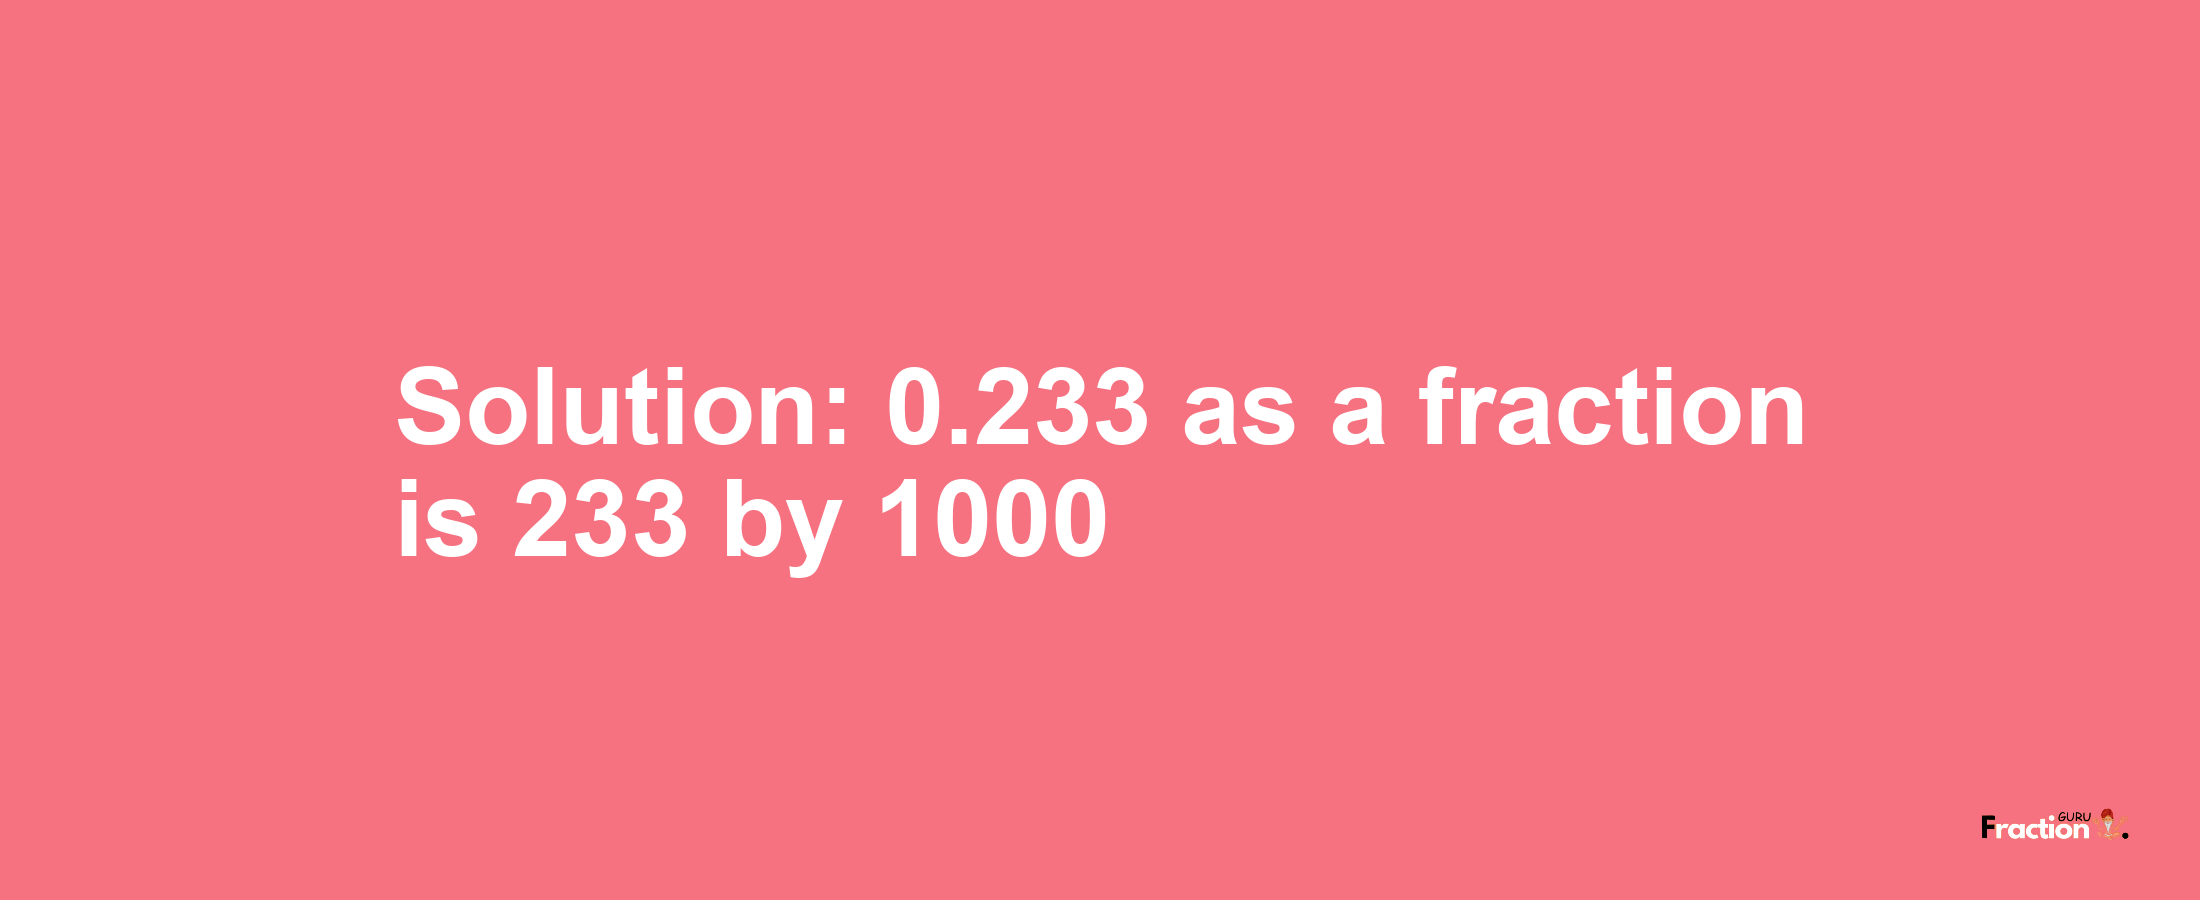 Solution:0.233 as a fraction is 233/1000